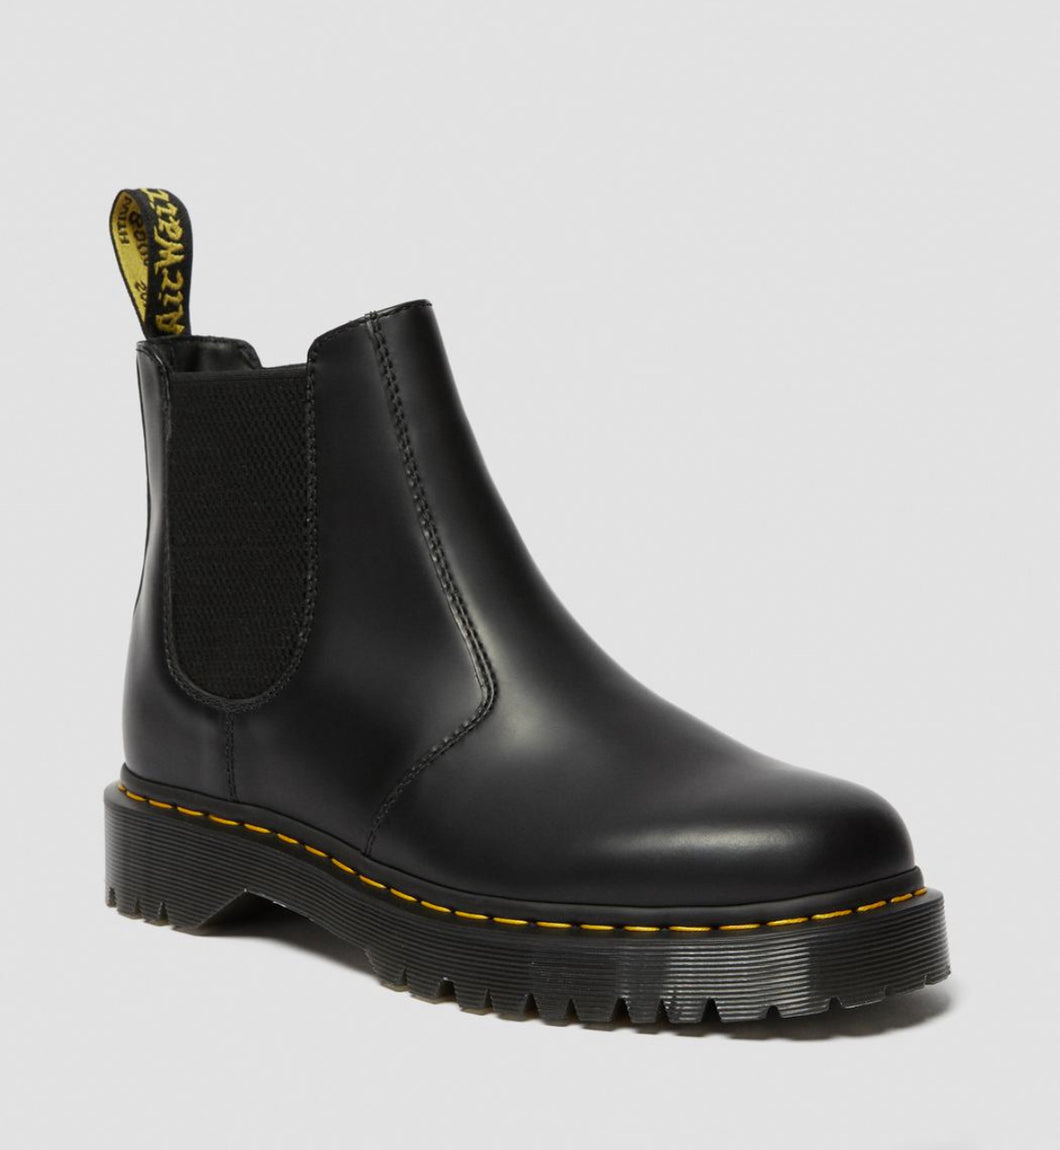 Dr.Martens 2976 Bex black Smooth Chelsea Boots 26205001